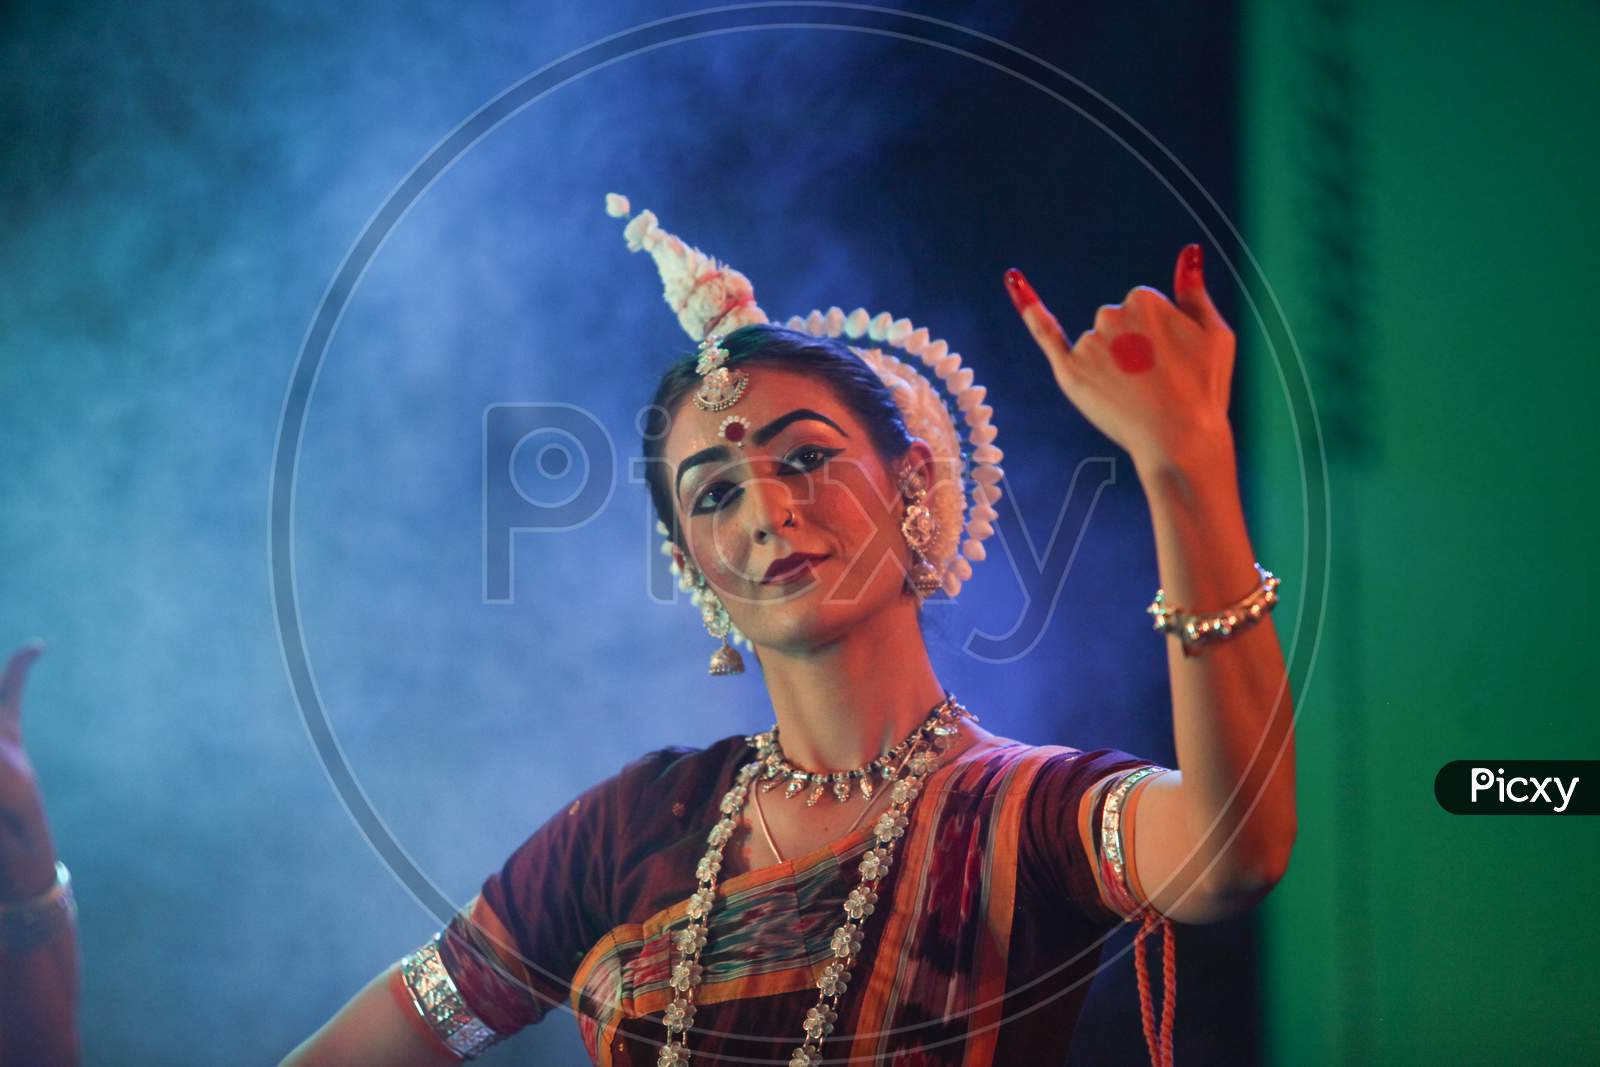 A young odissi dancer shows the beauty on December 14,2019 at Sevasadan hall,Bengaluru India